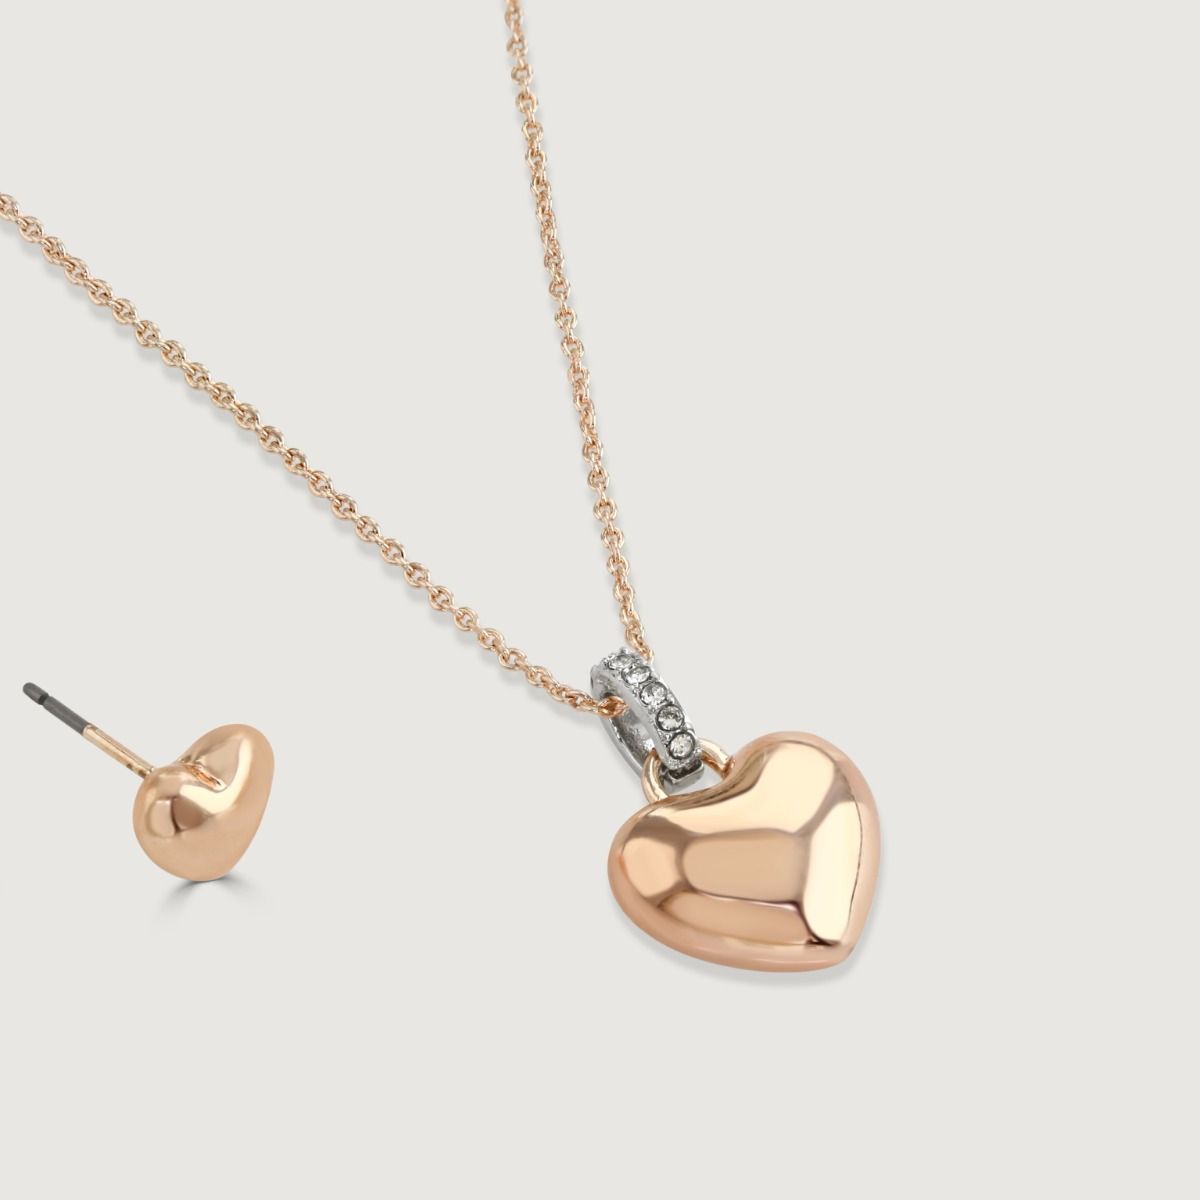 This sweet pendant and earrings set makes the perfect gift for someone special. The pendant features slender rose gold tone chain, decorated with a trio of beautiful heart charms in polished rose gold tone, silver tone with clear crystals, and gold tone w